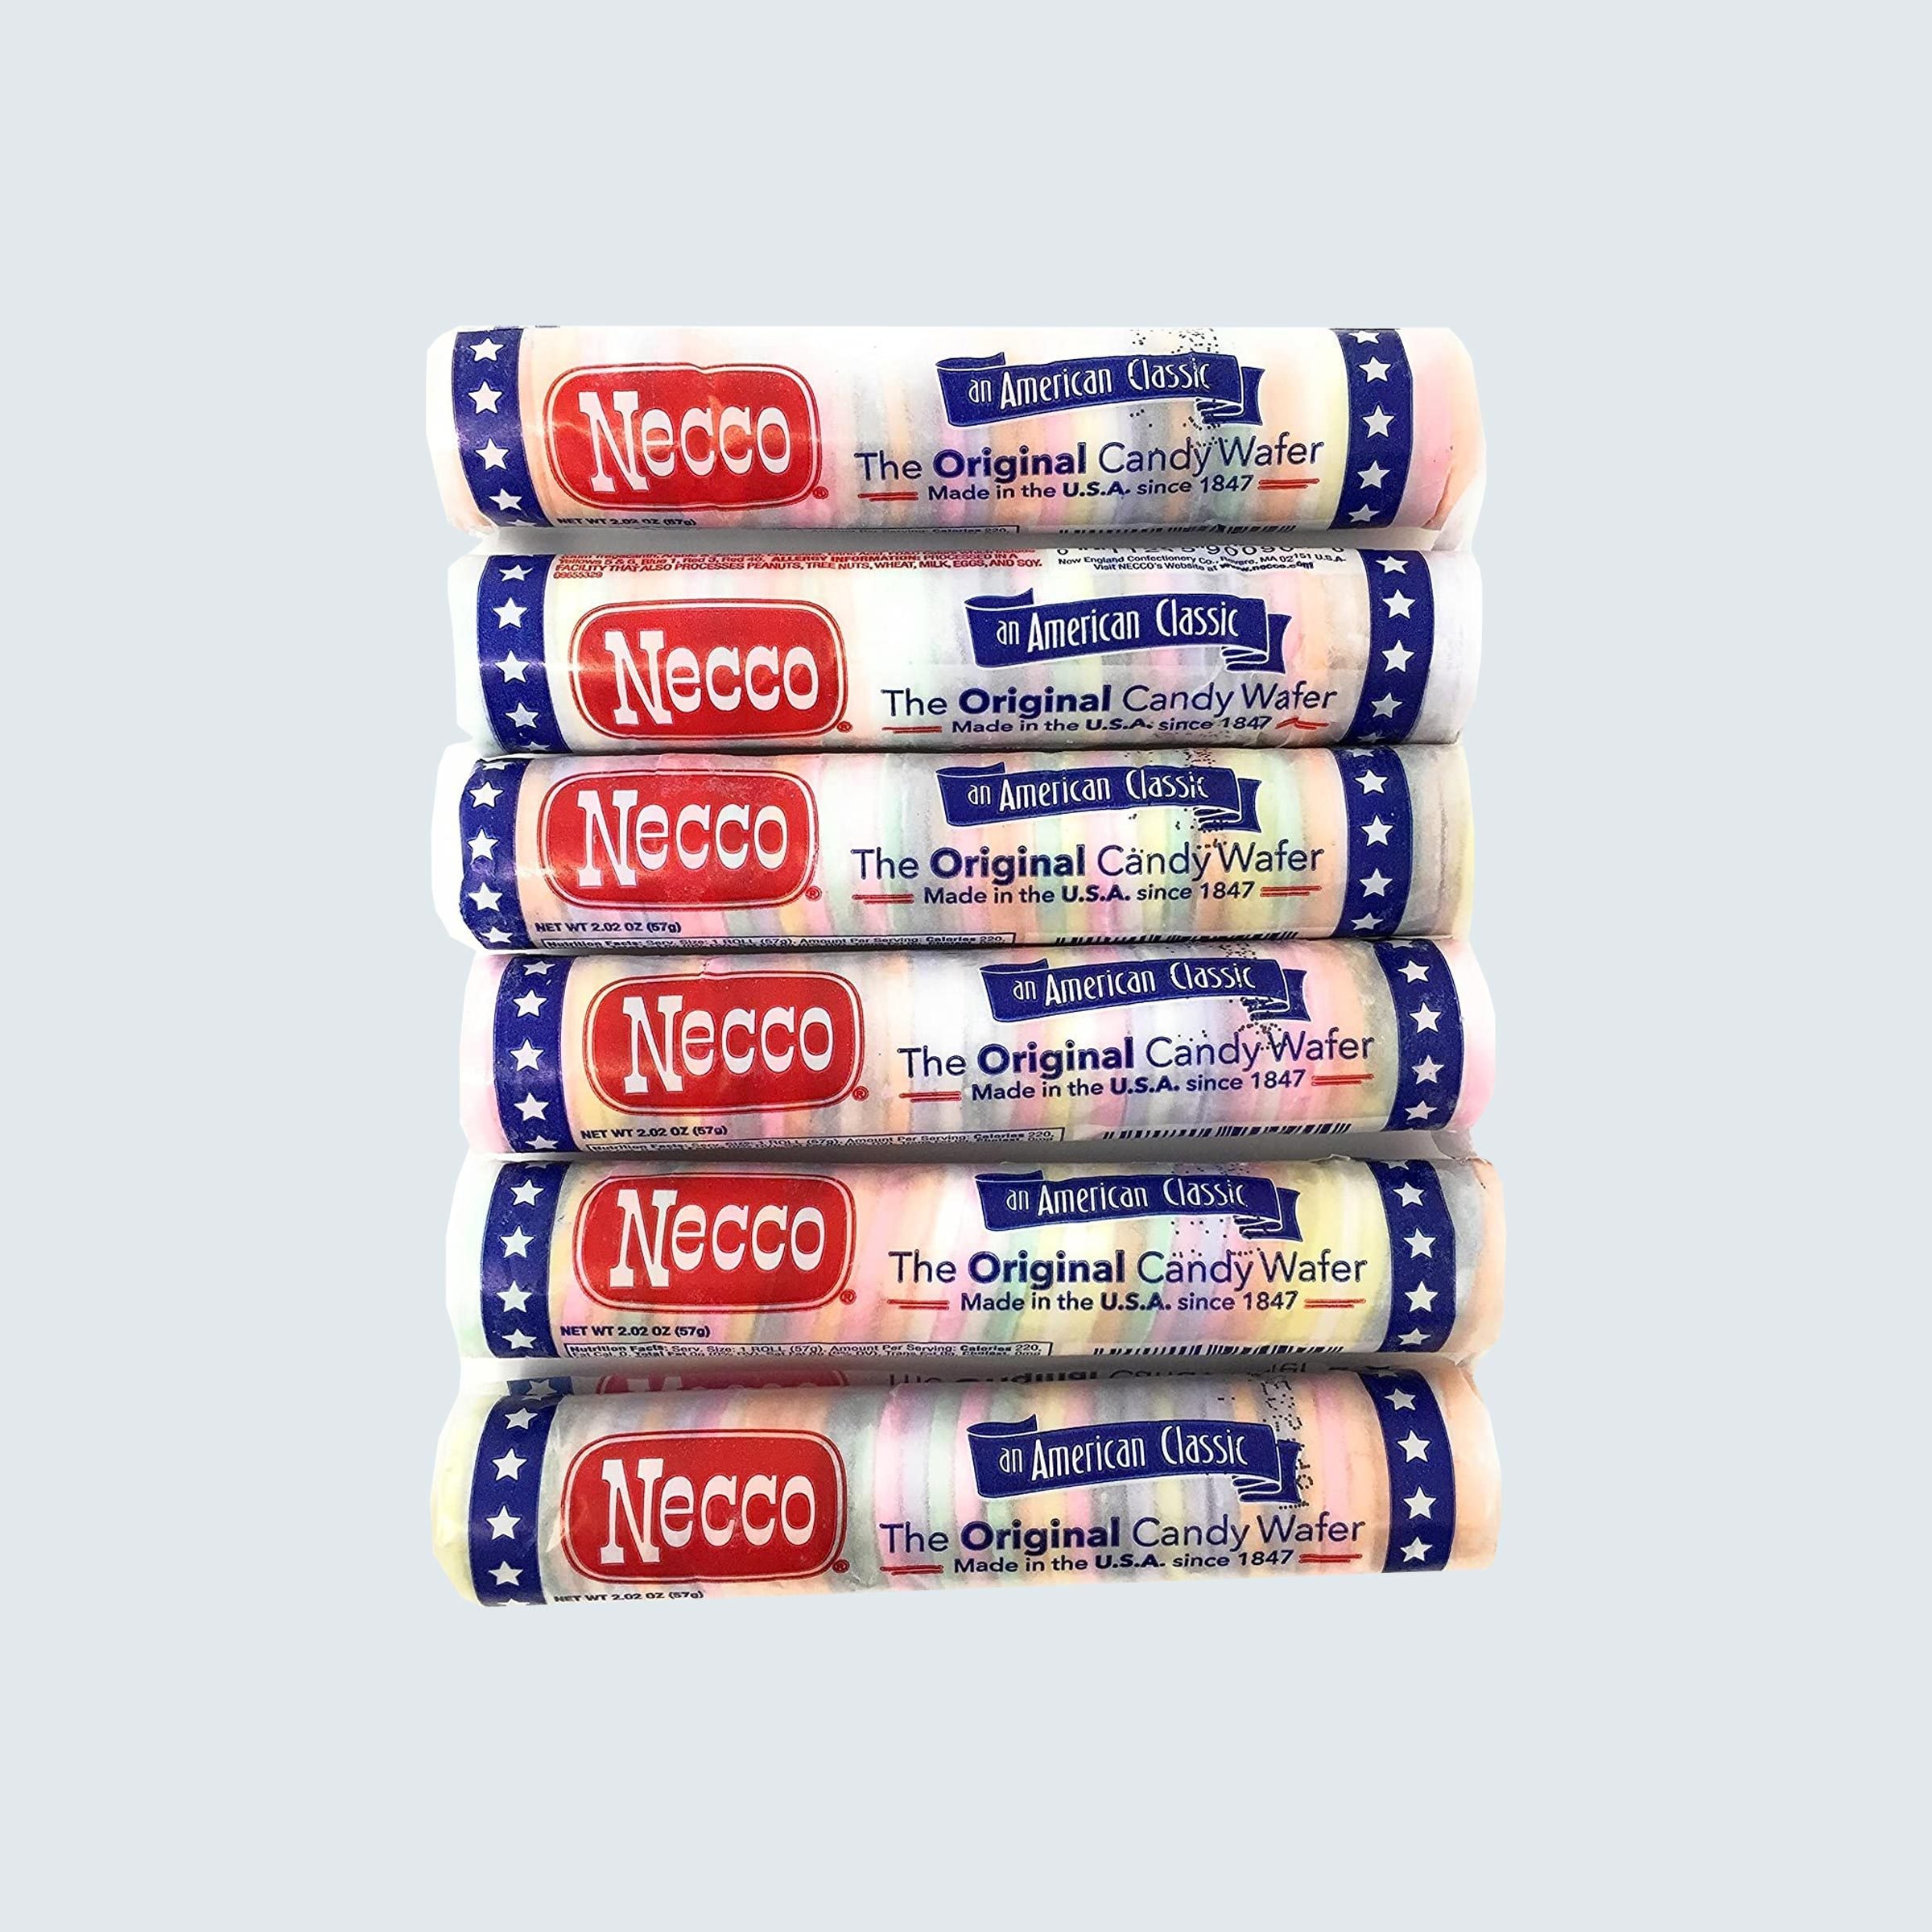 https://www.rd.com/wp-content/uploads/2020/06/50_Necco-Candy-Wafer.jpg